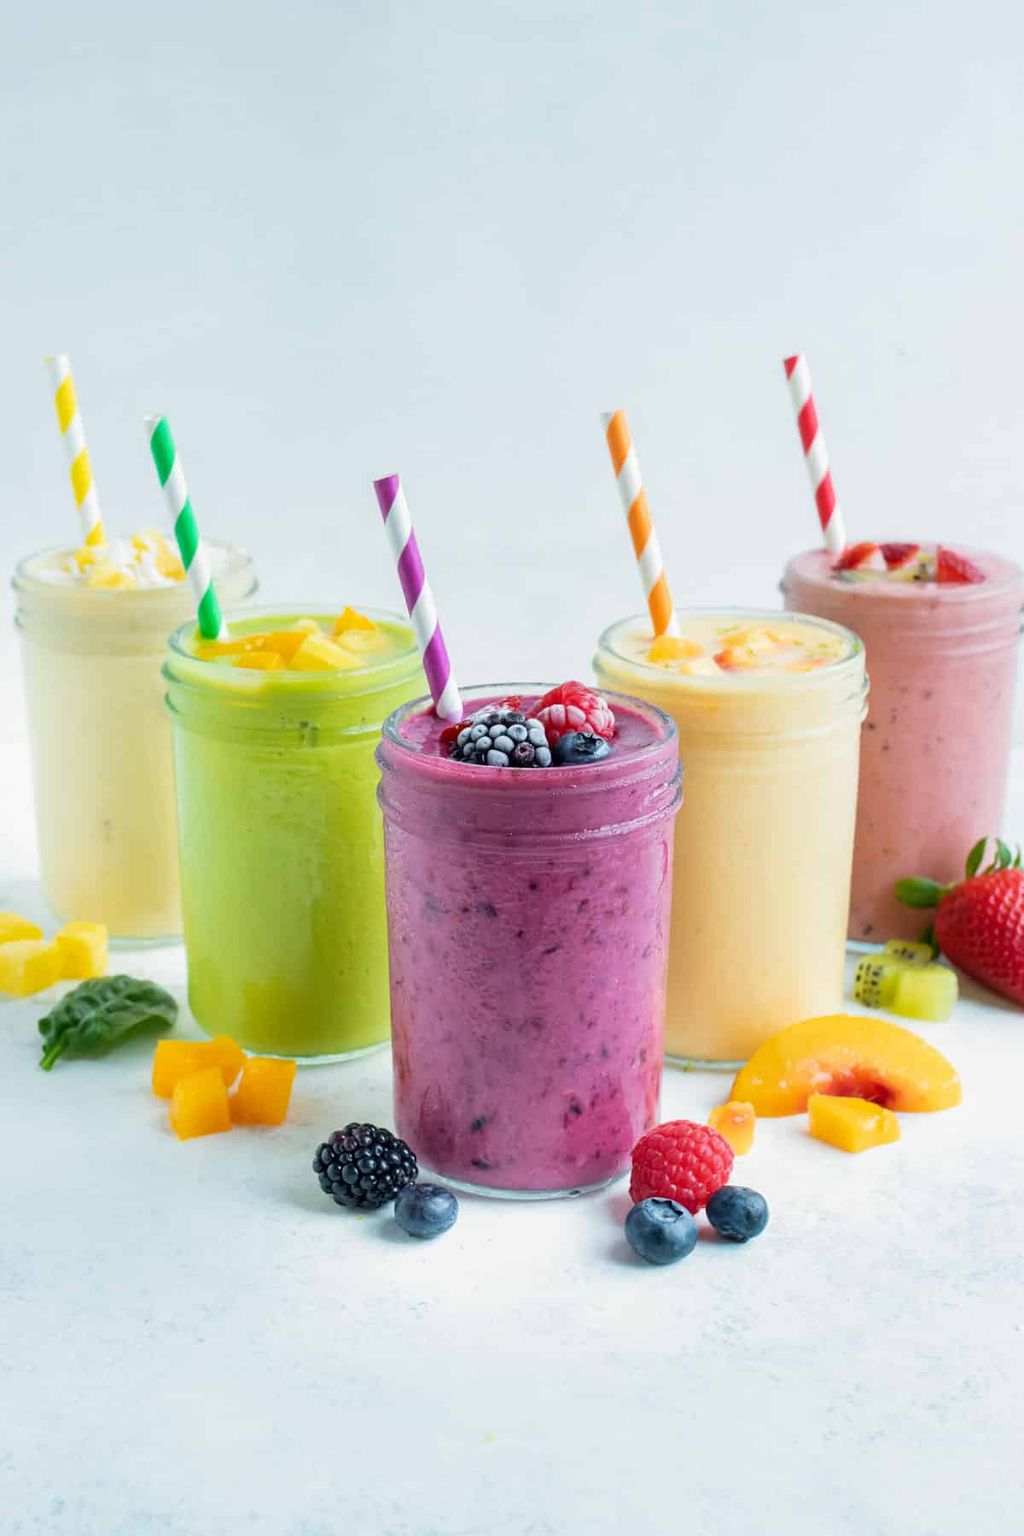 How-to-Make-Smoothie-1.jpg